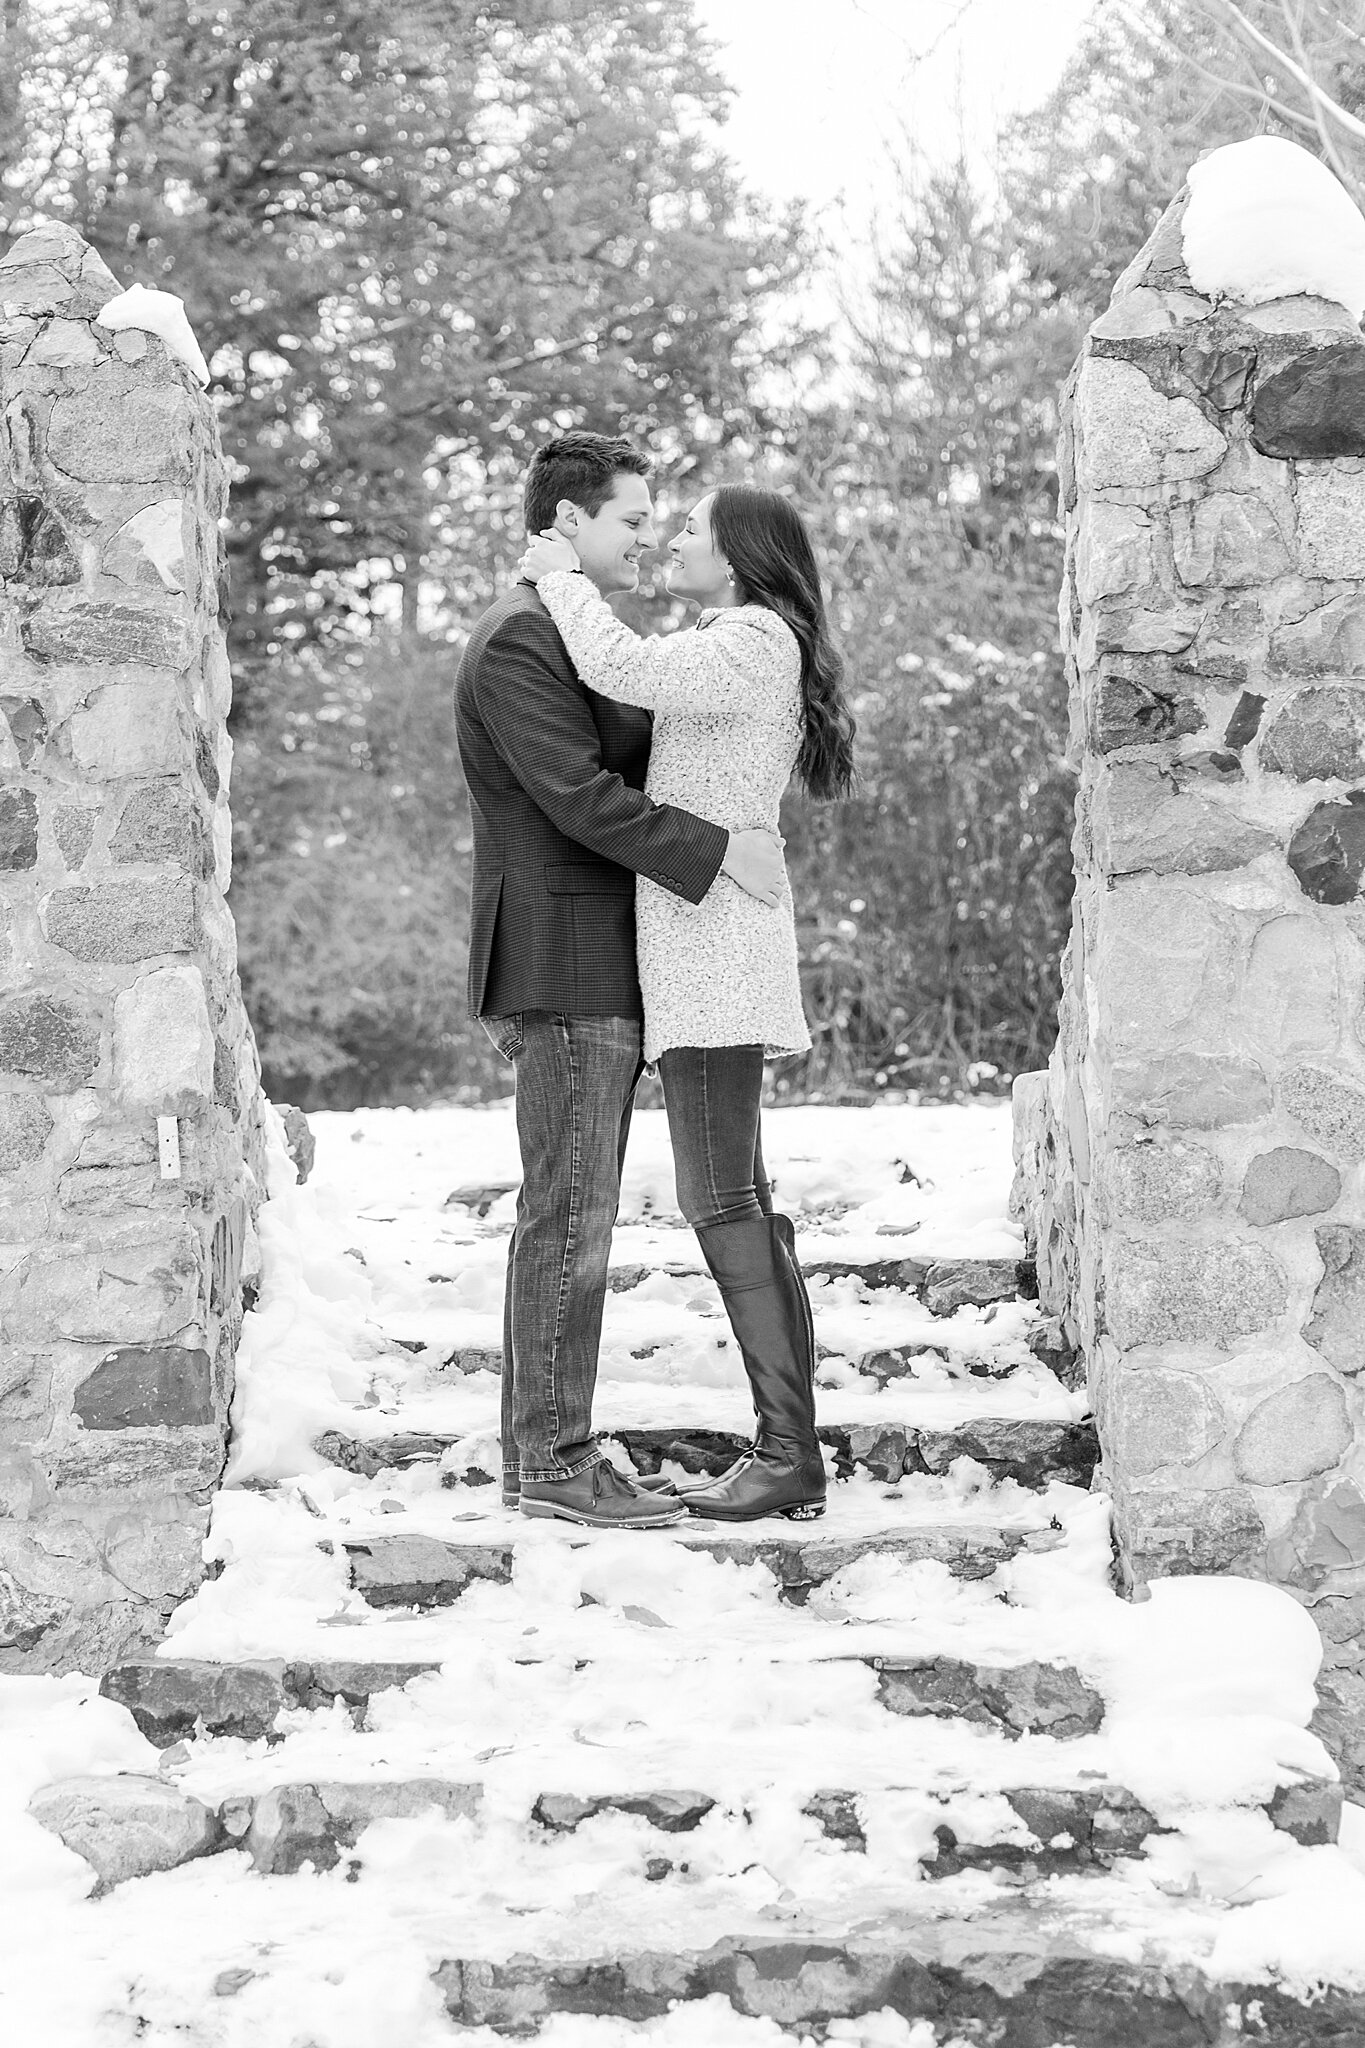 detroit-wedding-photographer-winter-engagement-photos-at-stony-creek-metropark-in-shelby-twp-mi-by-courtney-carolyn-photography_0013.jpg